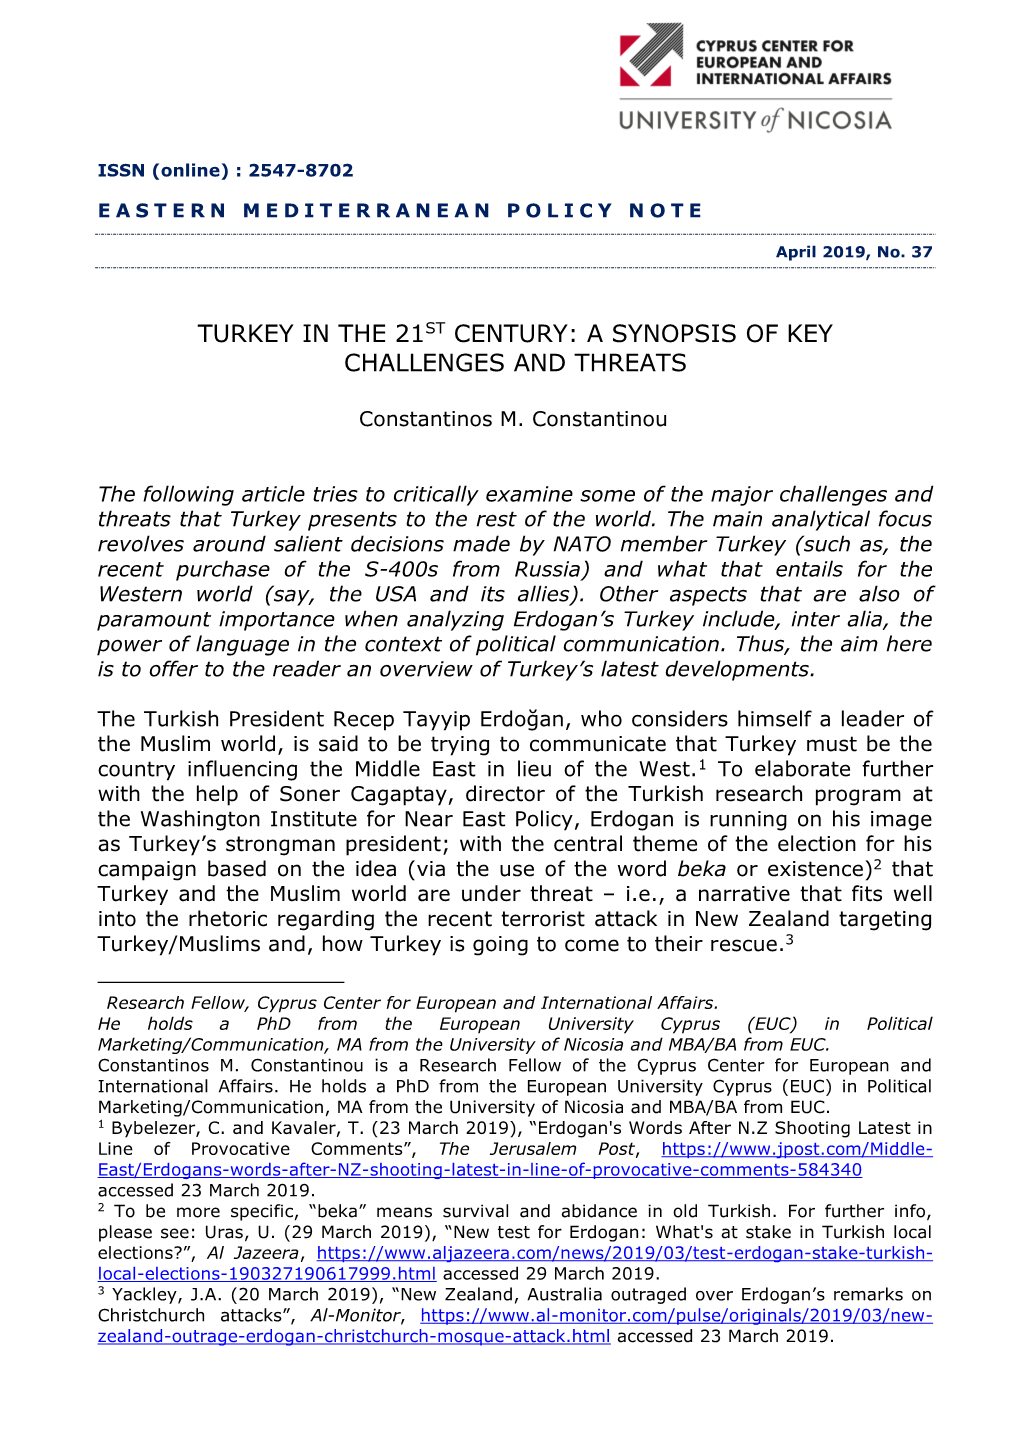 Turkey in the 21St Century: a Synopsis of Key Challenges and Threats